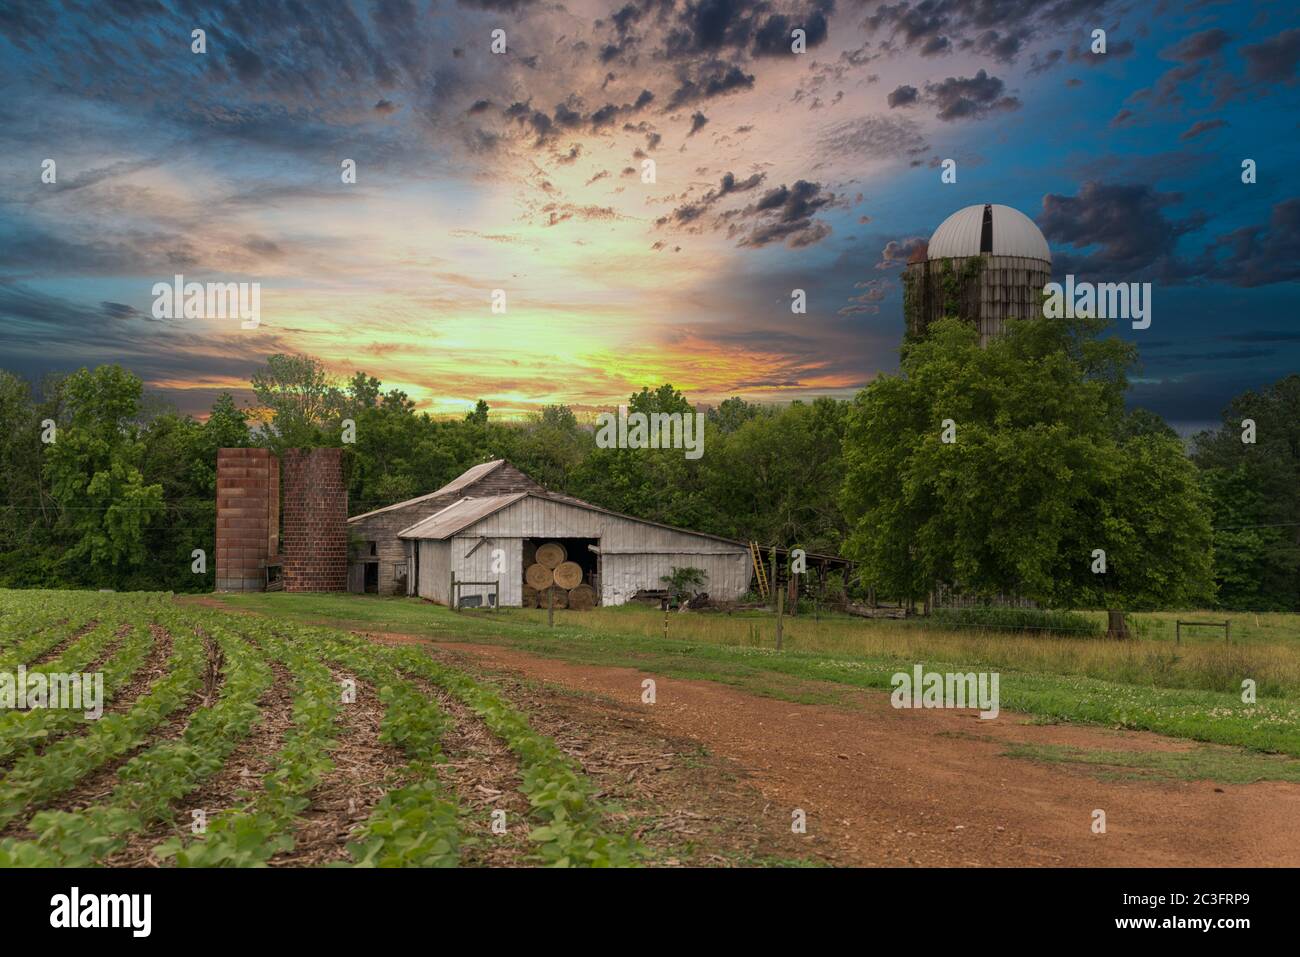 farm with silos and dirt roat with crops at sunset iwth beautiful skies Stock Photo